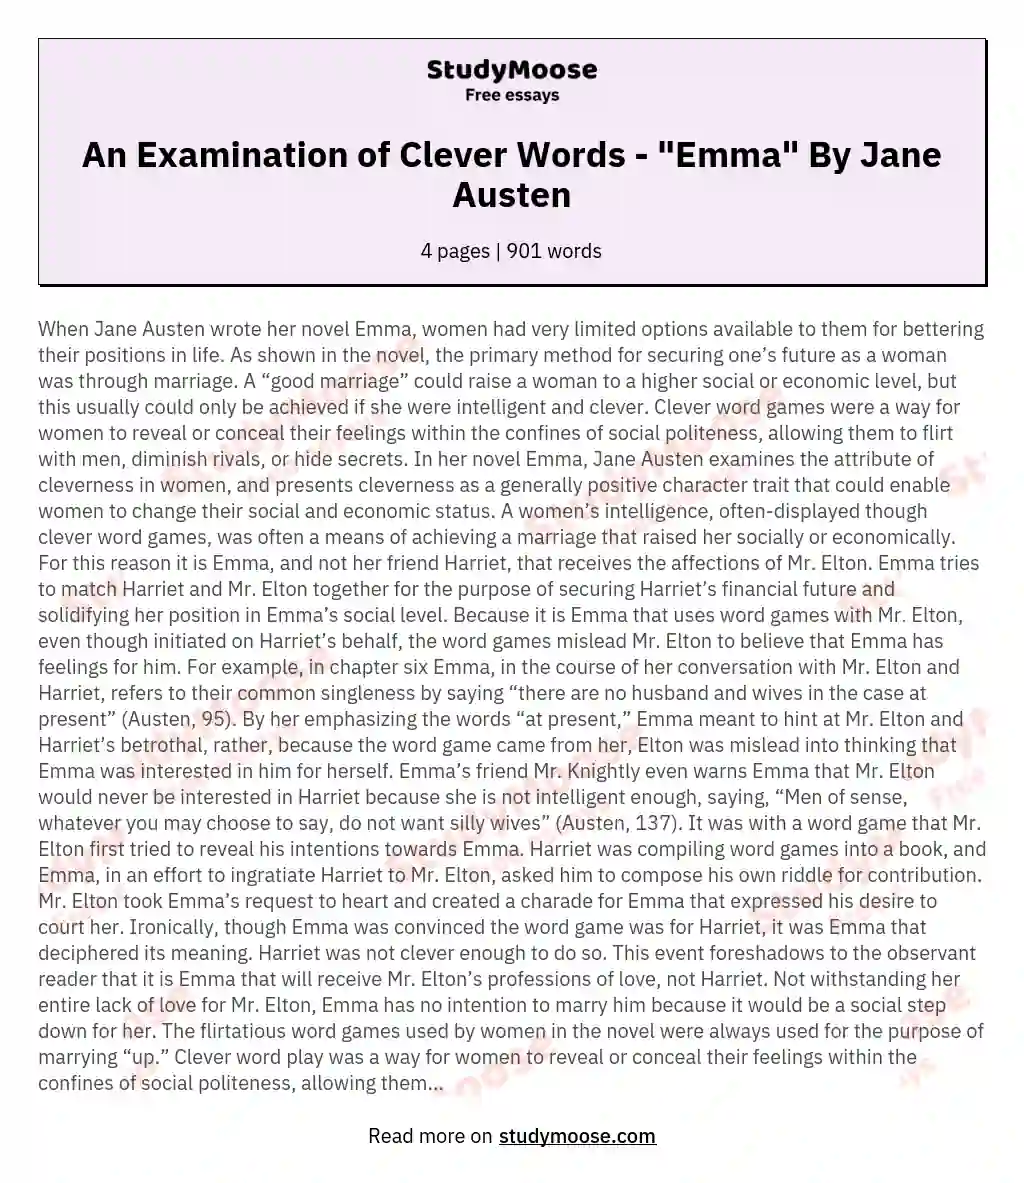 An Examination of Clever Words - "Emma" By Jane Austen